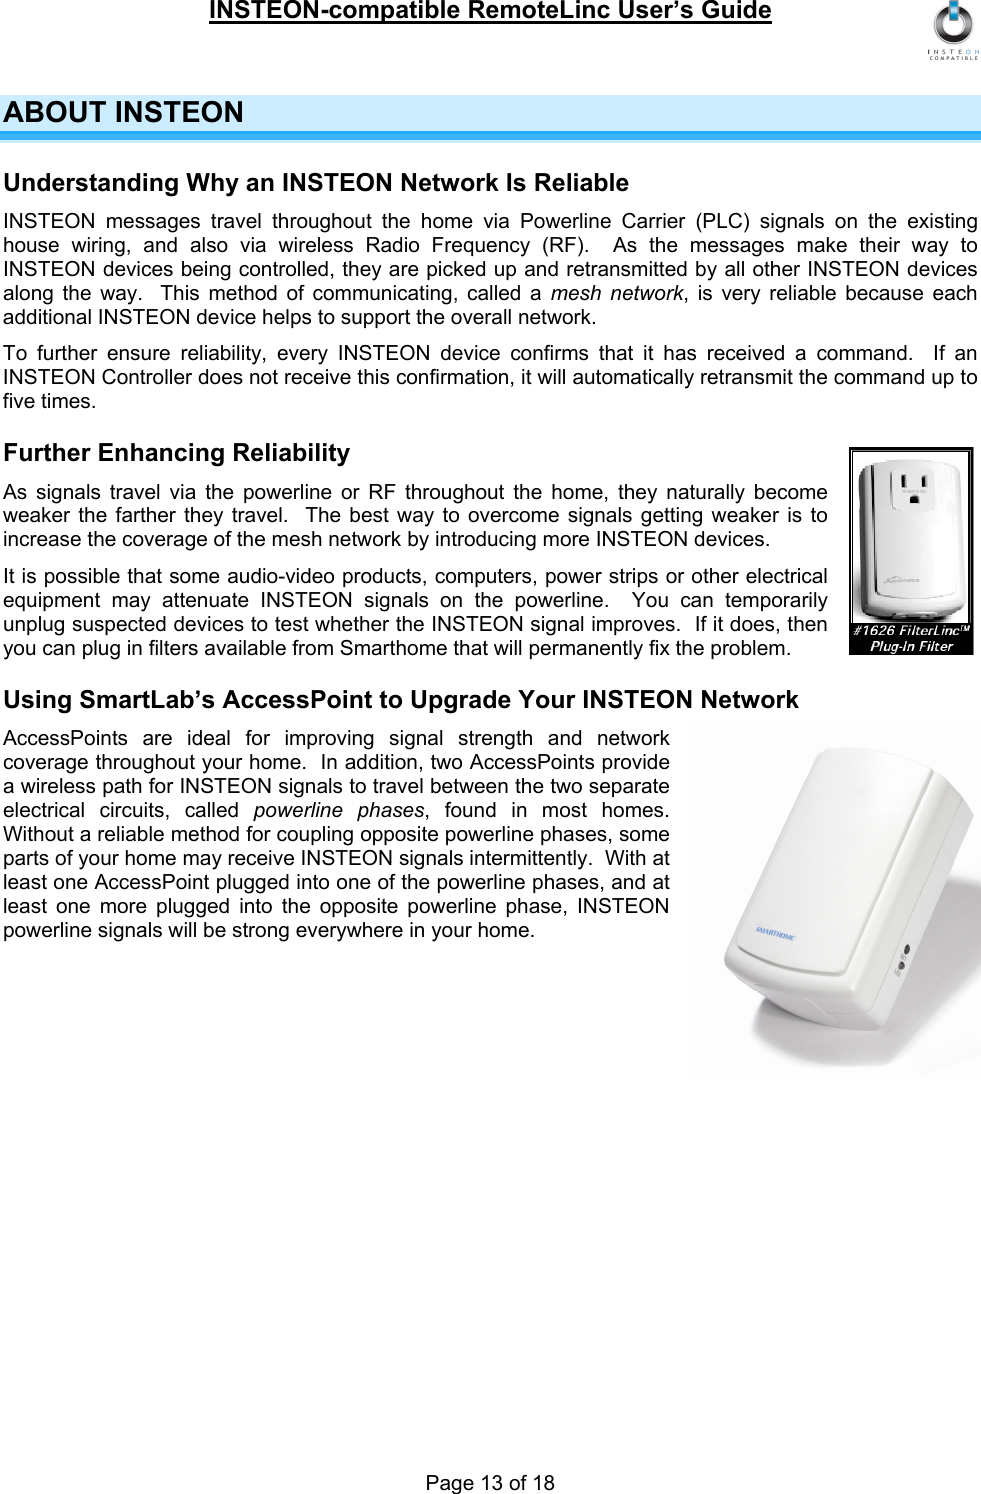 INSTEON-compatible RemoteLinc User’s Guide Page 13 of 18 ABOUT INSTEON Understanding Why an INSTEON Network Is Reliable INSTEON messages travel throughout the home via Powerline Carrier (PLC) signals on the existing house wiring, and also via wireless Radio Frequency (RF).  As the messages make their way to INSTEON devices being controlled, they are picked up and retransmitted by all other INSTEON devices along the way.  This method of communicating, called a mesh network, is very reliable because each additional INSTEON device helps to support the overall network. To further ensure reliability, every INSTEON device confirms that it has received a command.  If an INSTEON Controller does not receive this confirmation, it will automatically retransmit the command up to five times. Further Enhancing Reliability As signals travel via the powerline or RF throughout the home, they naturally become weaker the farther they travel.  The best way to overcome signals getting weaker is to increase the coverage of the mesh network by introducing more INSTEON devices. It is possible that some audio-video products, computers, power strips or other electrical equipment may attenuate INSTEON signals on the powerline.  You can temporarily unplug suspected devices to test whether the INSTEON signal improves.  If it does, then you can plug in filters available from Smarthome that will permanently fix the problem. Using SmartLab’s AccessPoint to Upgrade Your INSTEON Network AccessPoints are ideal for improving signal strength and network coverage throughout your home.  In addition, two AccessPoints provide a wireless path for INSTEON signals to travel between the two separate electrical circuits, called powerline phases, found in most homes.  Without a reliable method for coupling opposite powerline phases, some parts of your home may receive INSTEON signals intermittently.  With at least one AccessPoint plugged into one of the powerline phases, and at least one more plugged into the opposite powerline phase, INSTEON powerline signals will be strong everywhere in your home. 